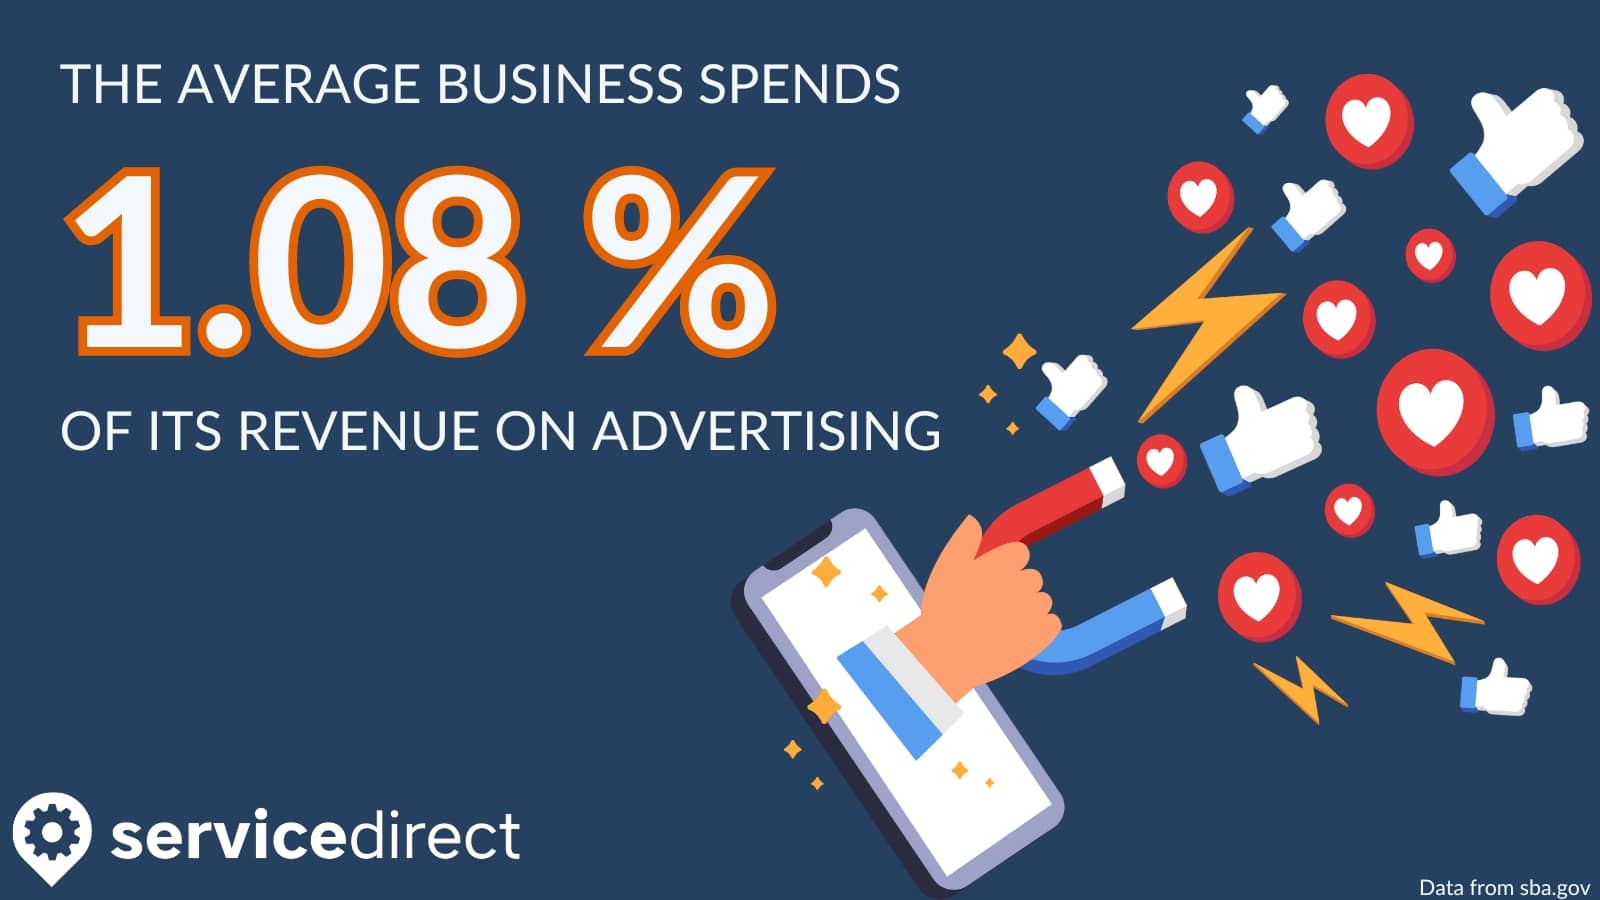 The average business spends 1.08% of its revenue on advertising.